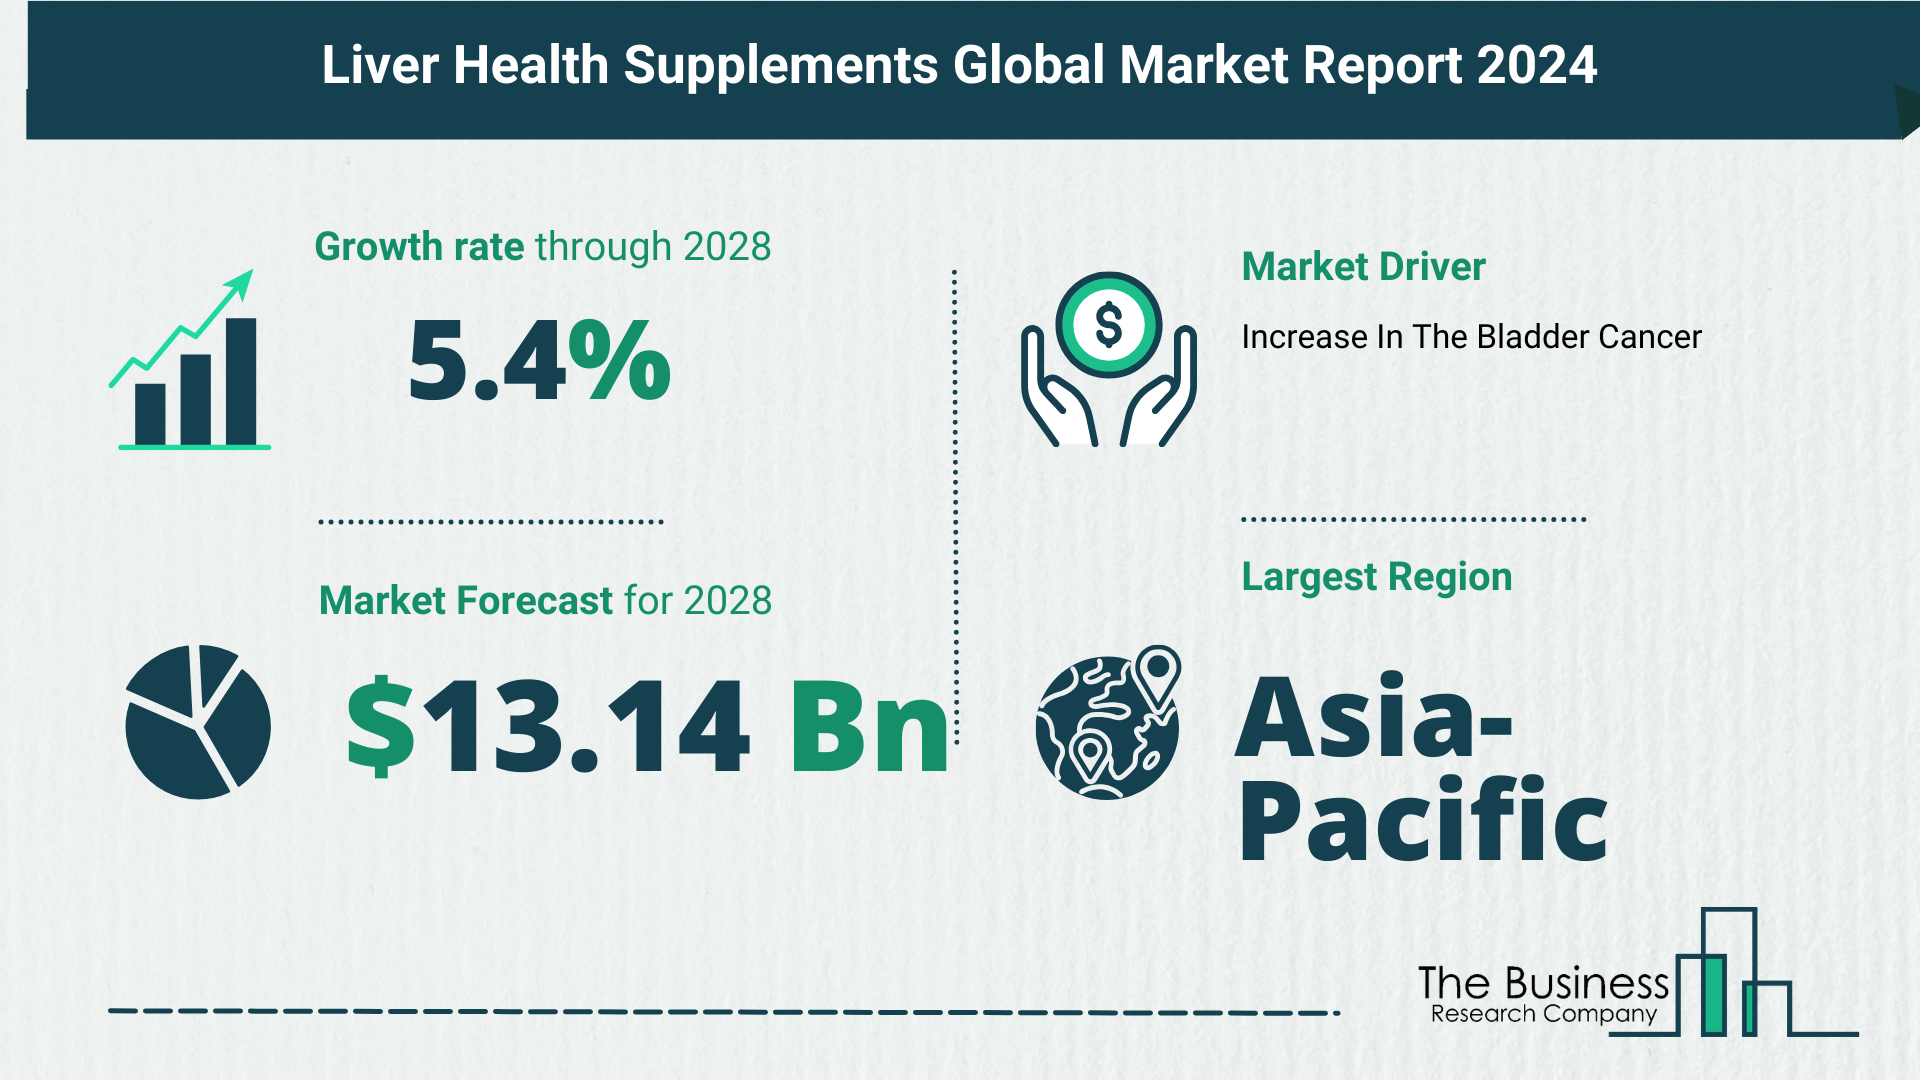 Overview Of The Liver Health Supplements Market 2024: Size, Drivers, And Trends